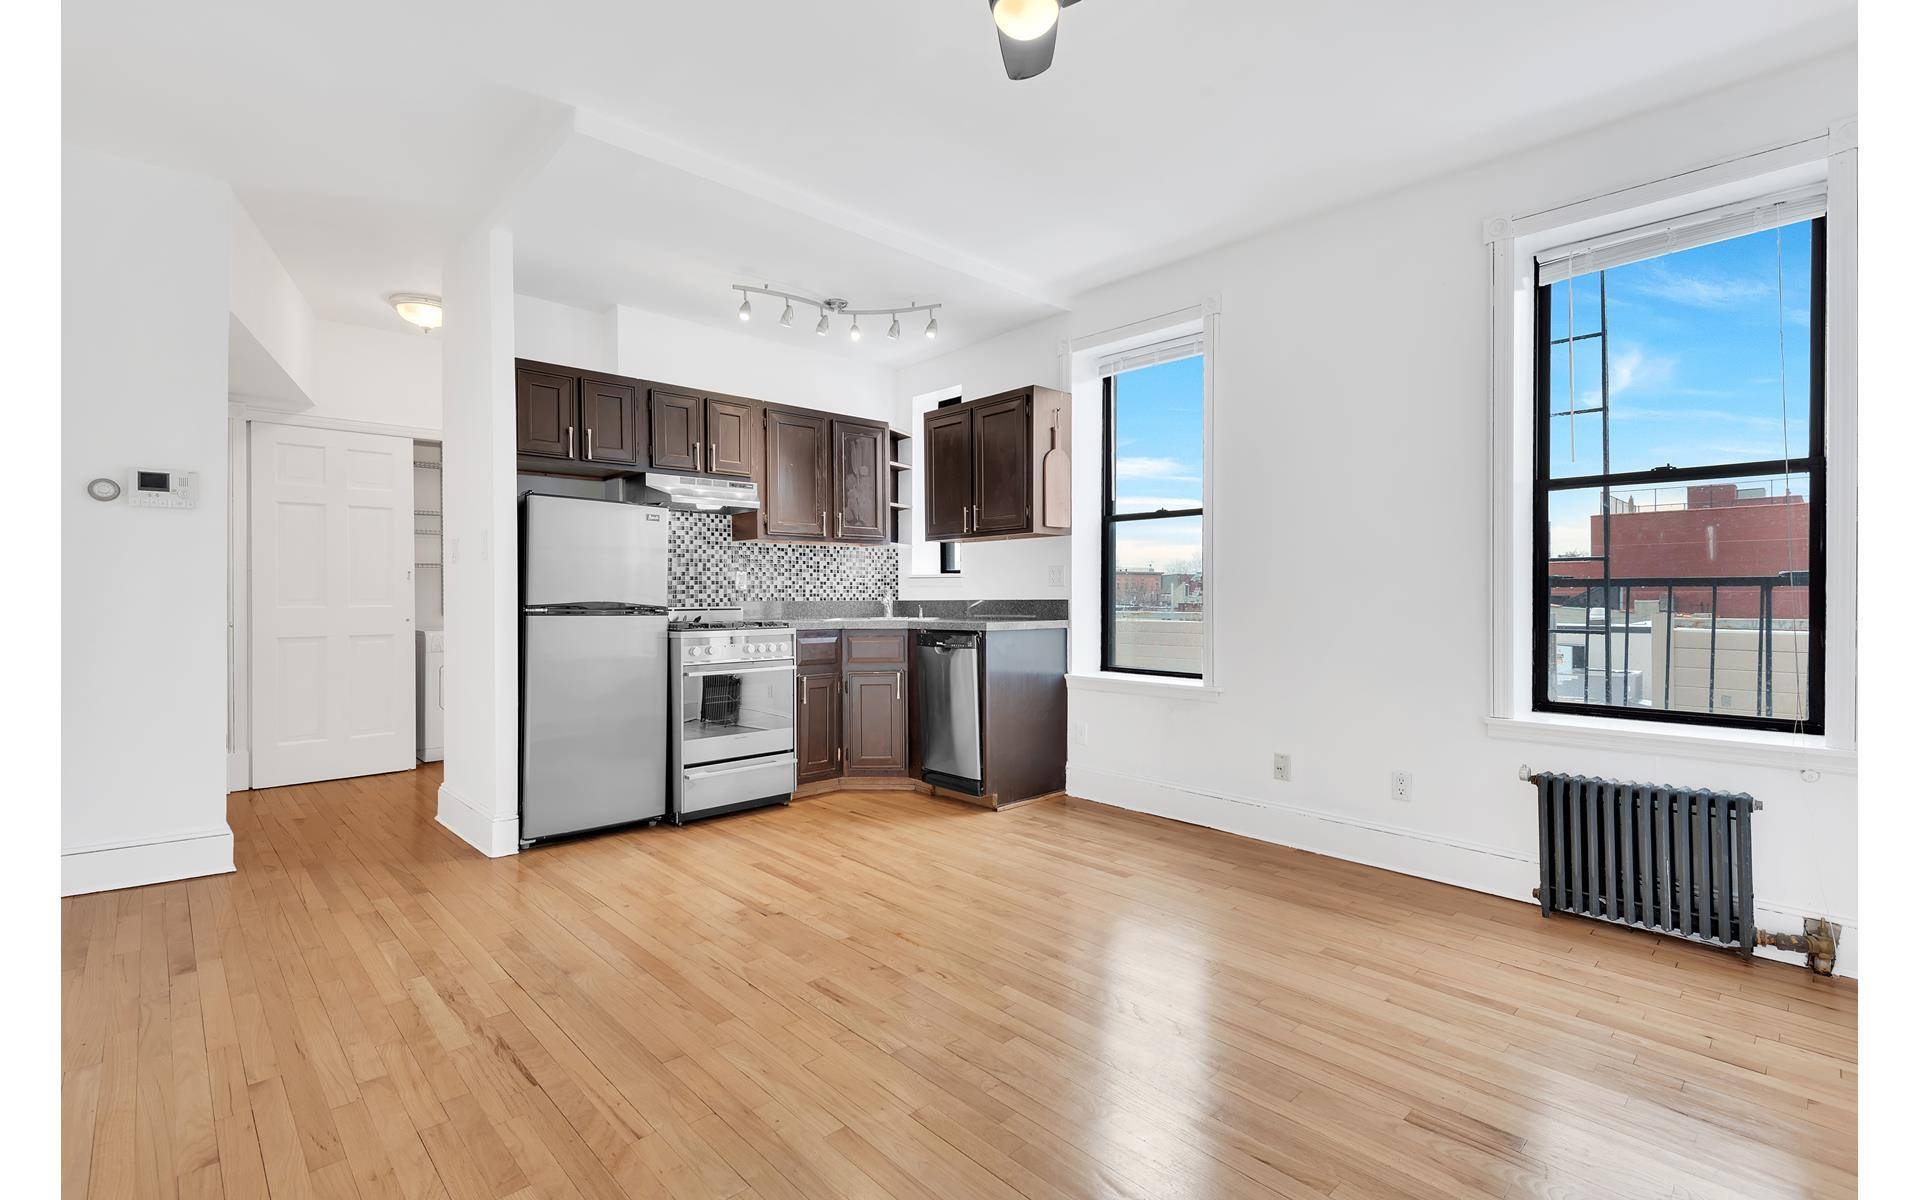 This newly renovated, loft like sun flooded one bedroom apartment has beautiful hardwood floors throughout, abundant closet space, an in unit washer dryer and a video intercom.